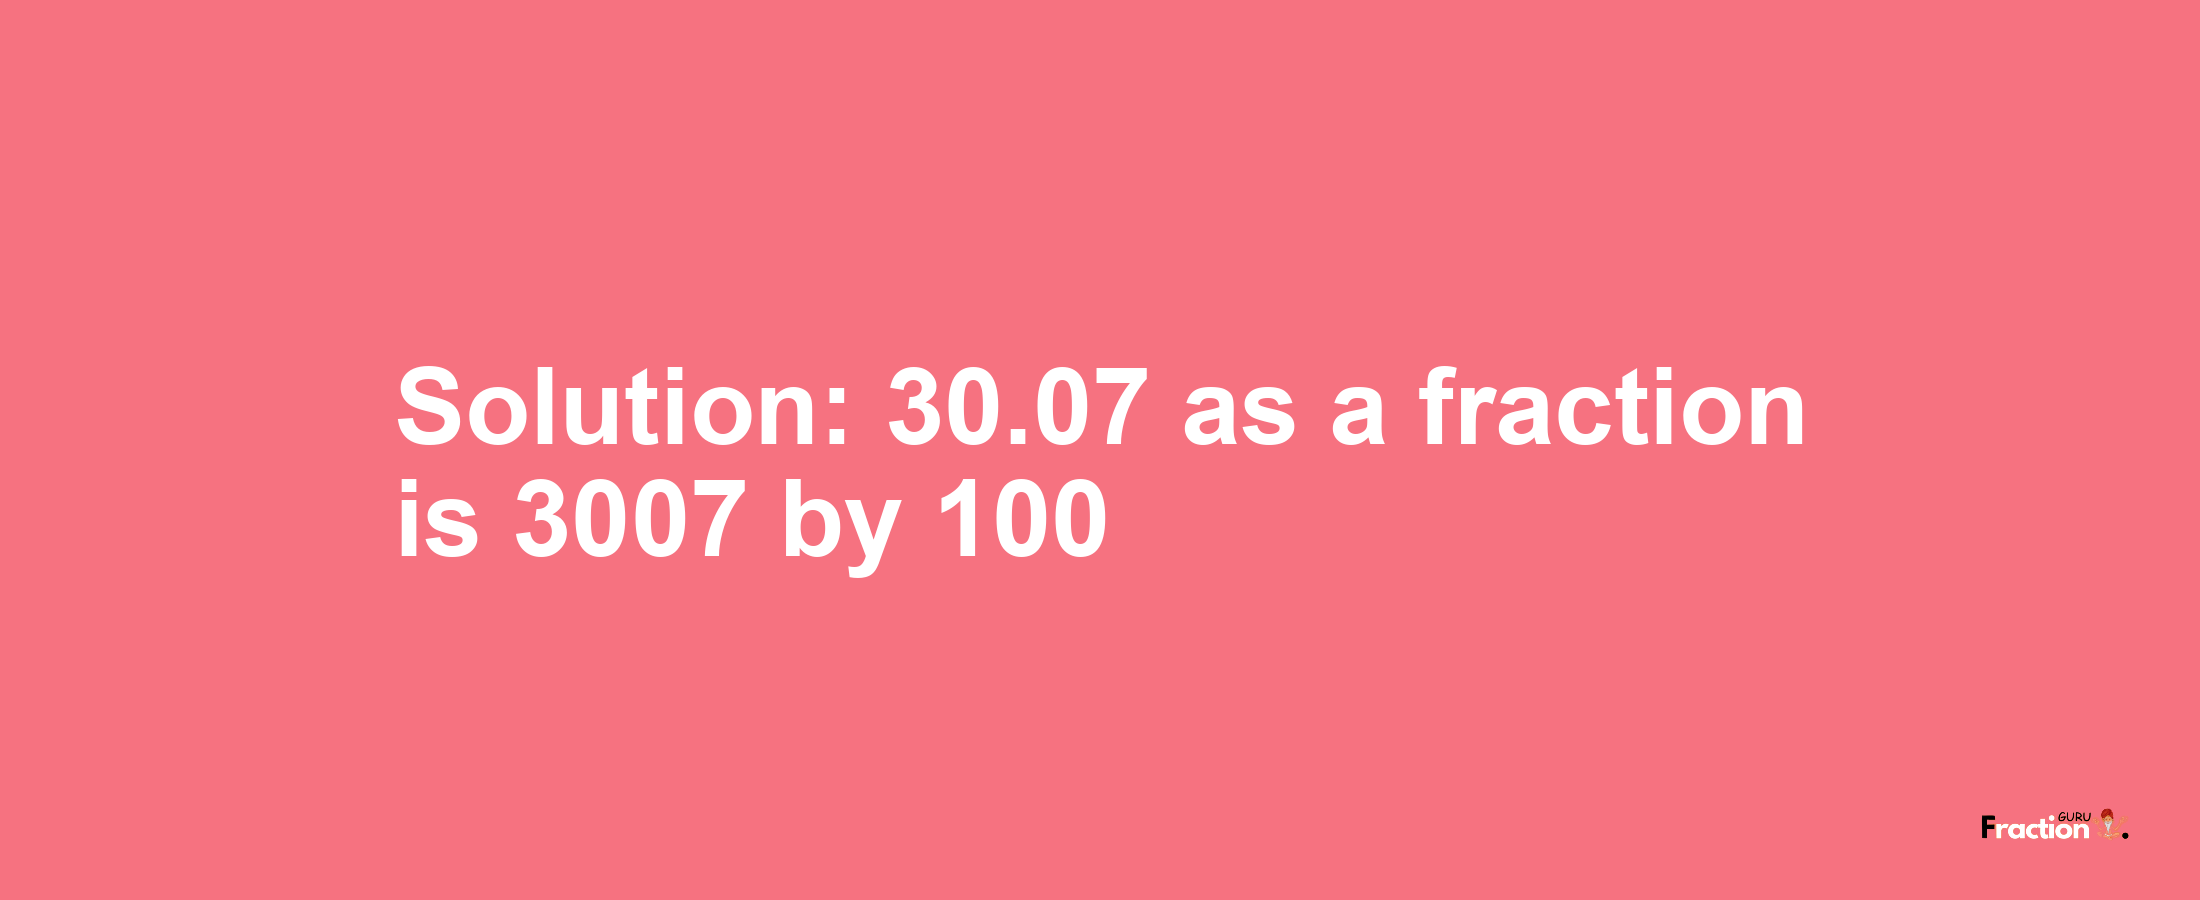 Solution:30.07 as a fraction is 3007/100